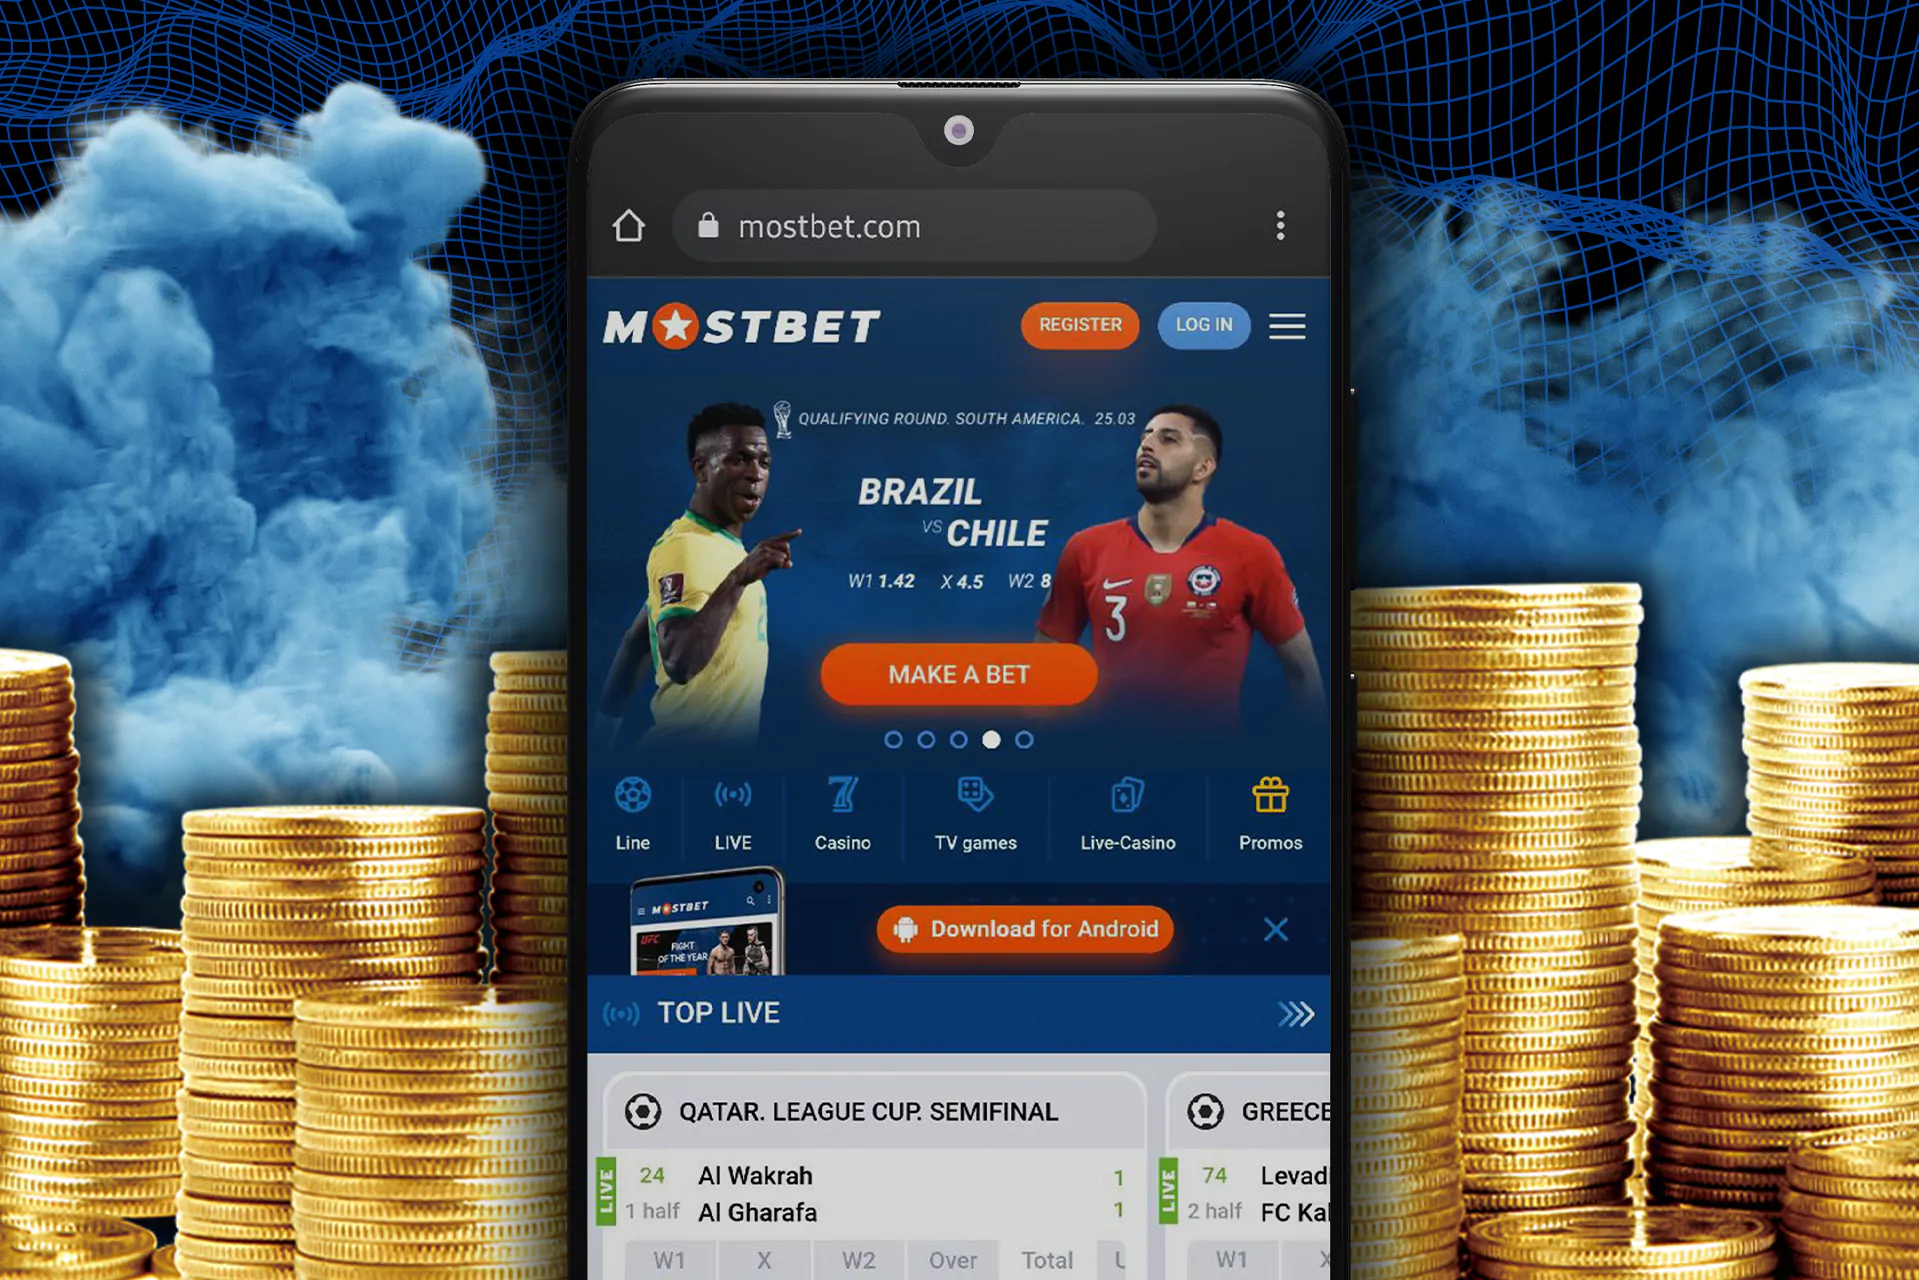 You can use a mobile version instead of the Mostbet app.